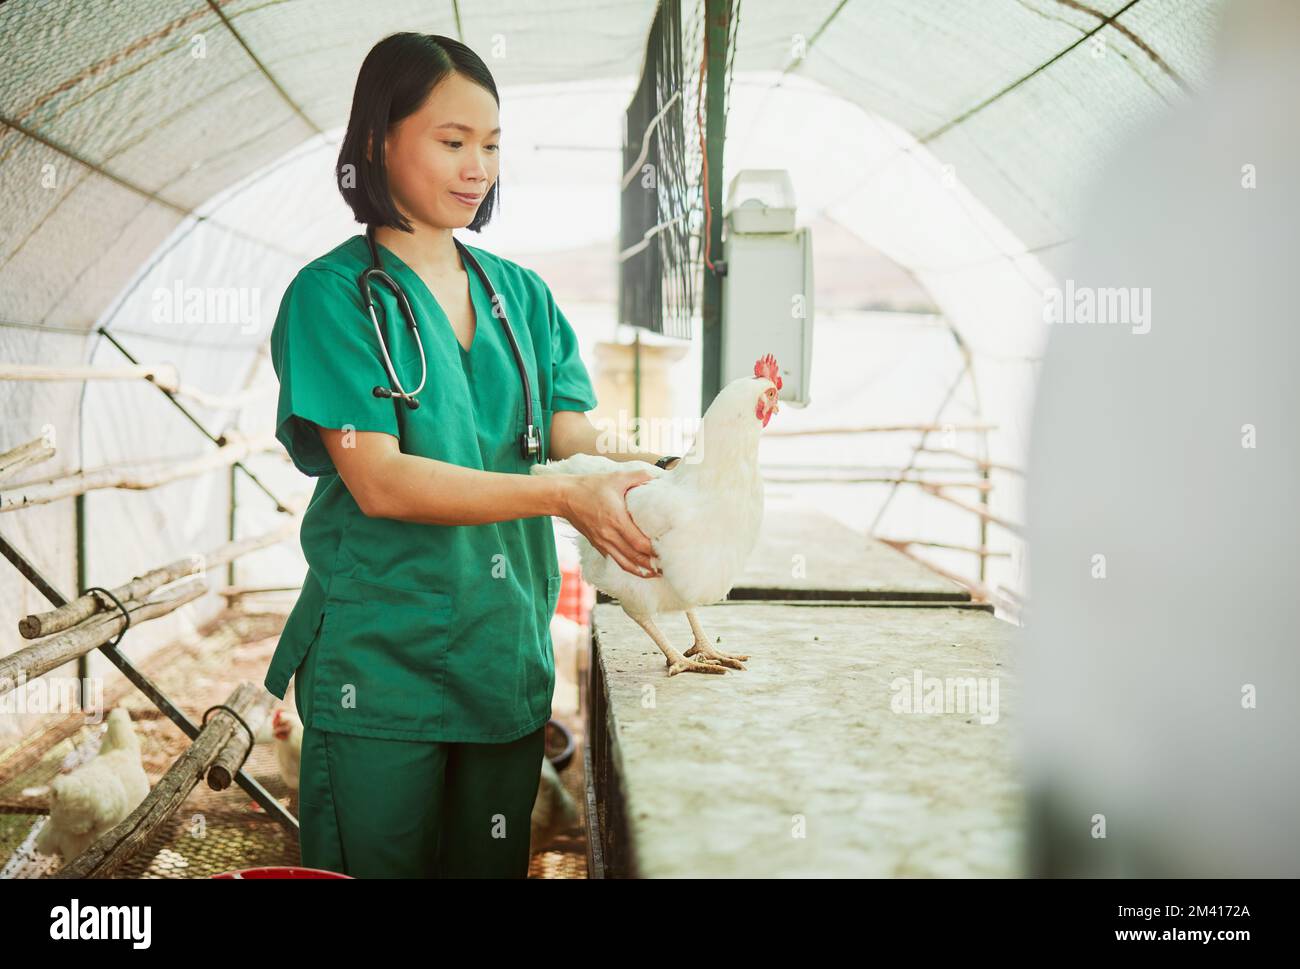 Woman, veterinary or chicken farm check in bird flu vaccine, growth hormone medicine or pet wellness insurance. Happy, healthcare worker or animal Stock Photo